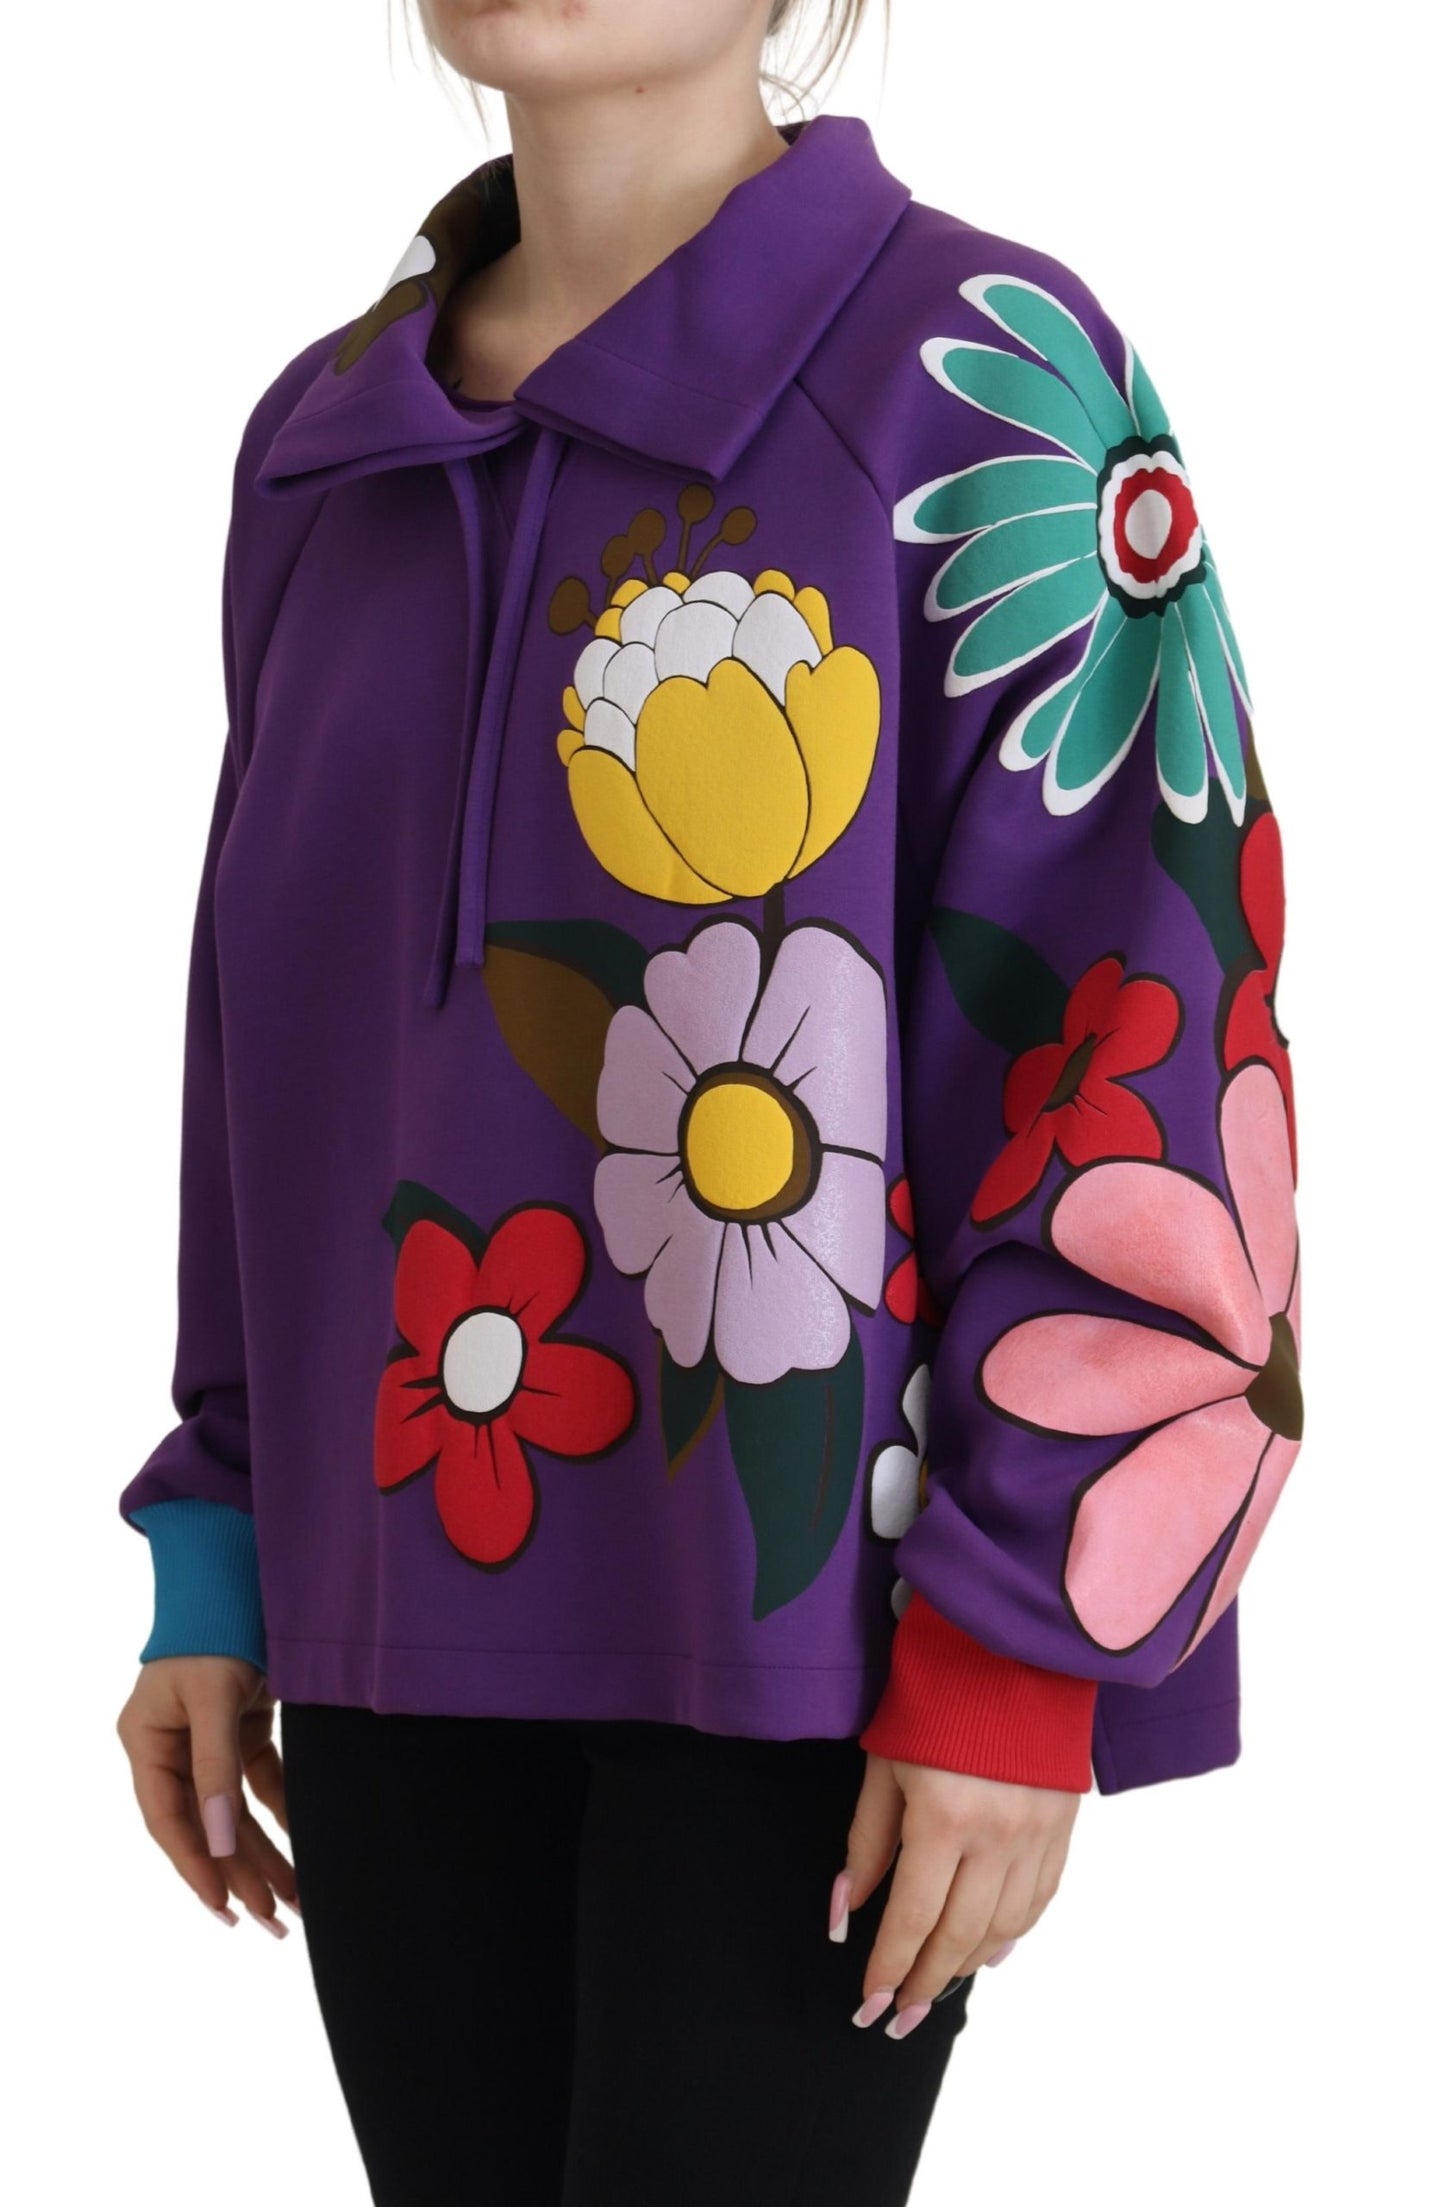 Dolce & Gabbana Purple Floral Priving Pullover Cotton Pull